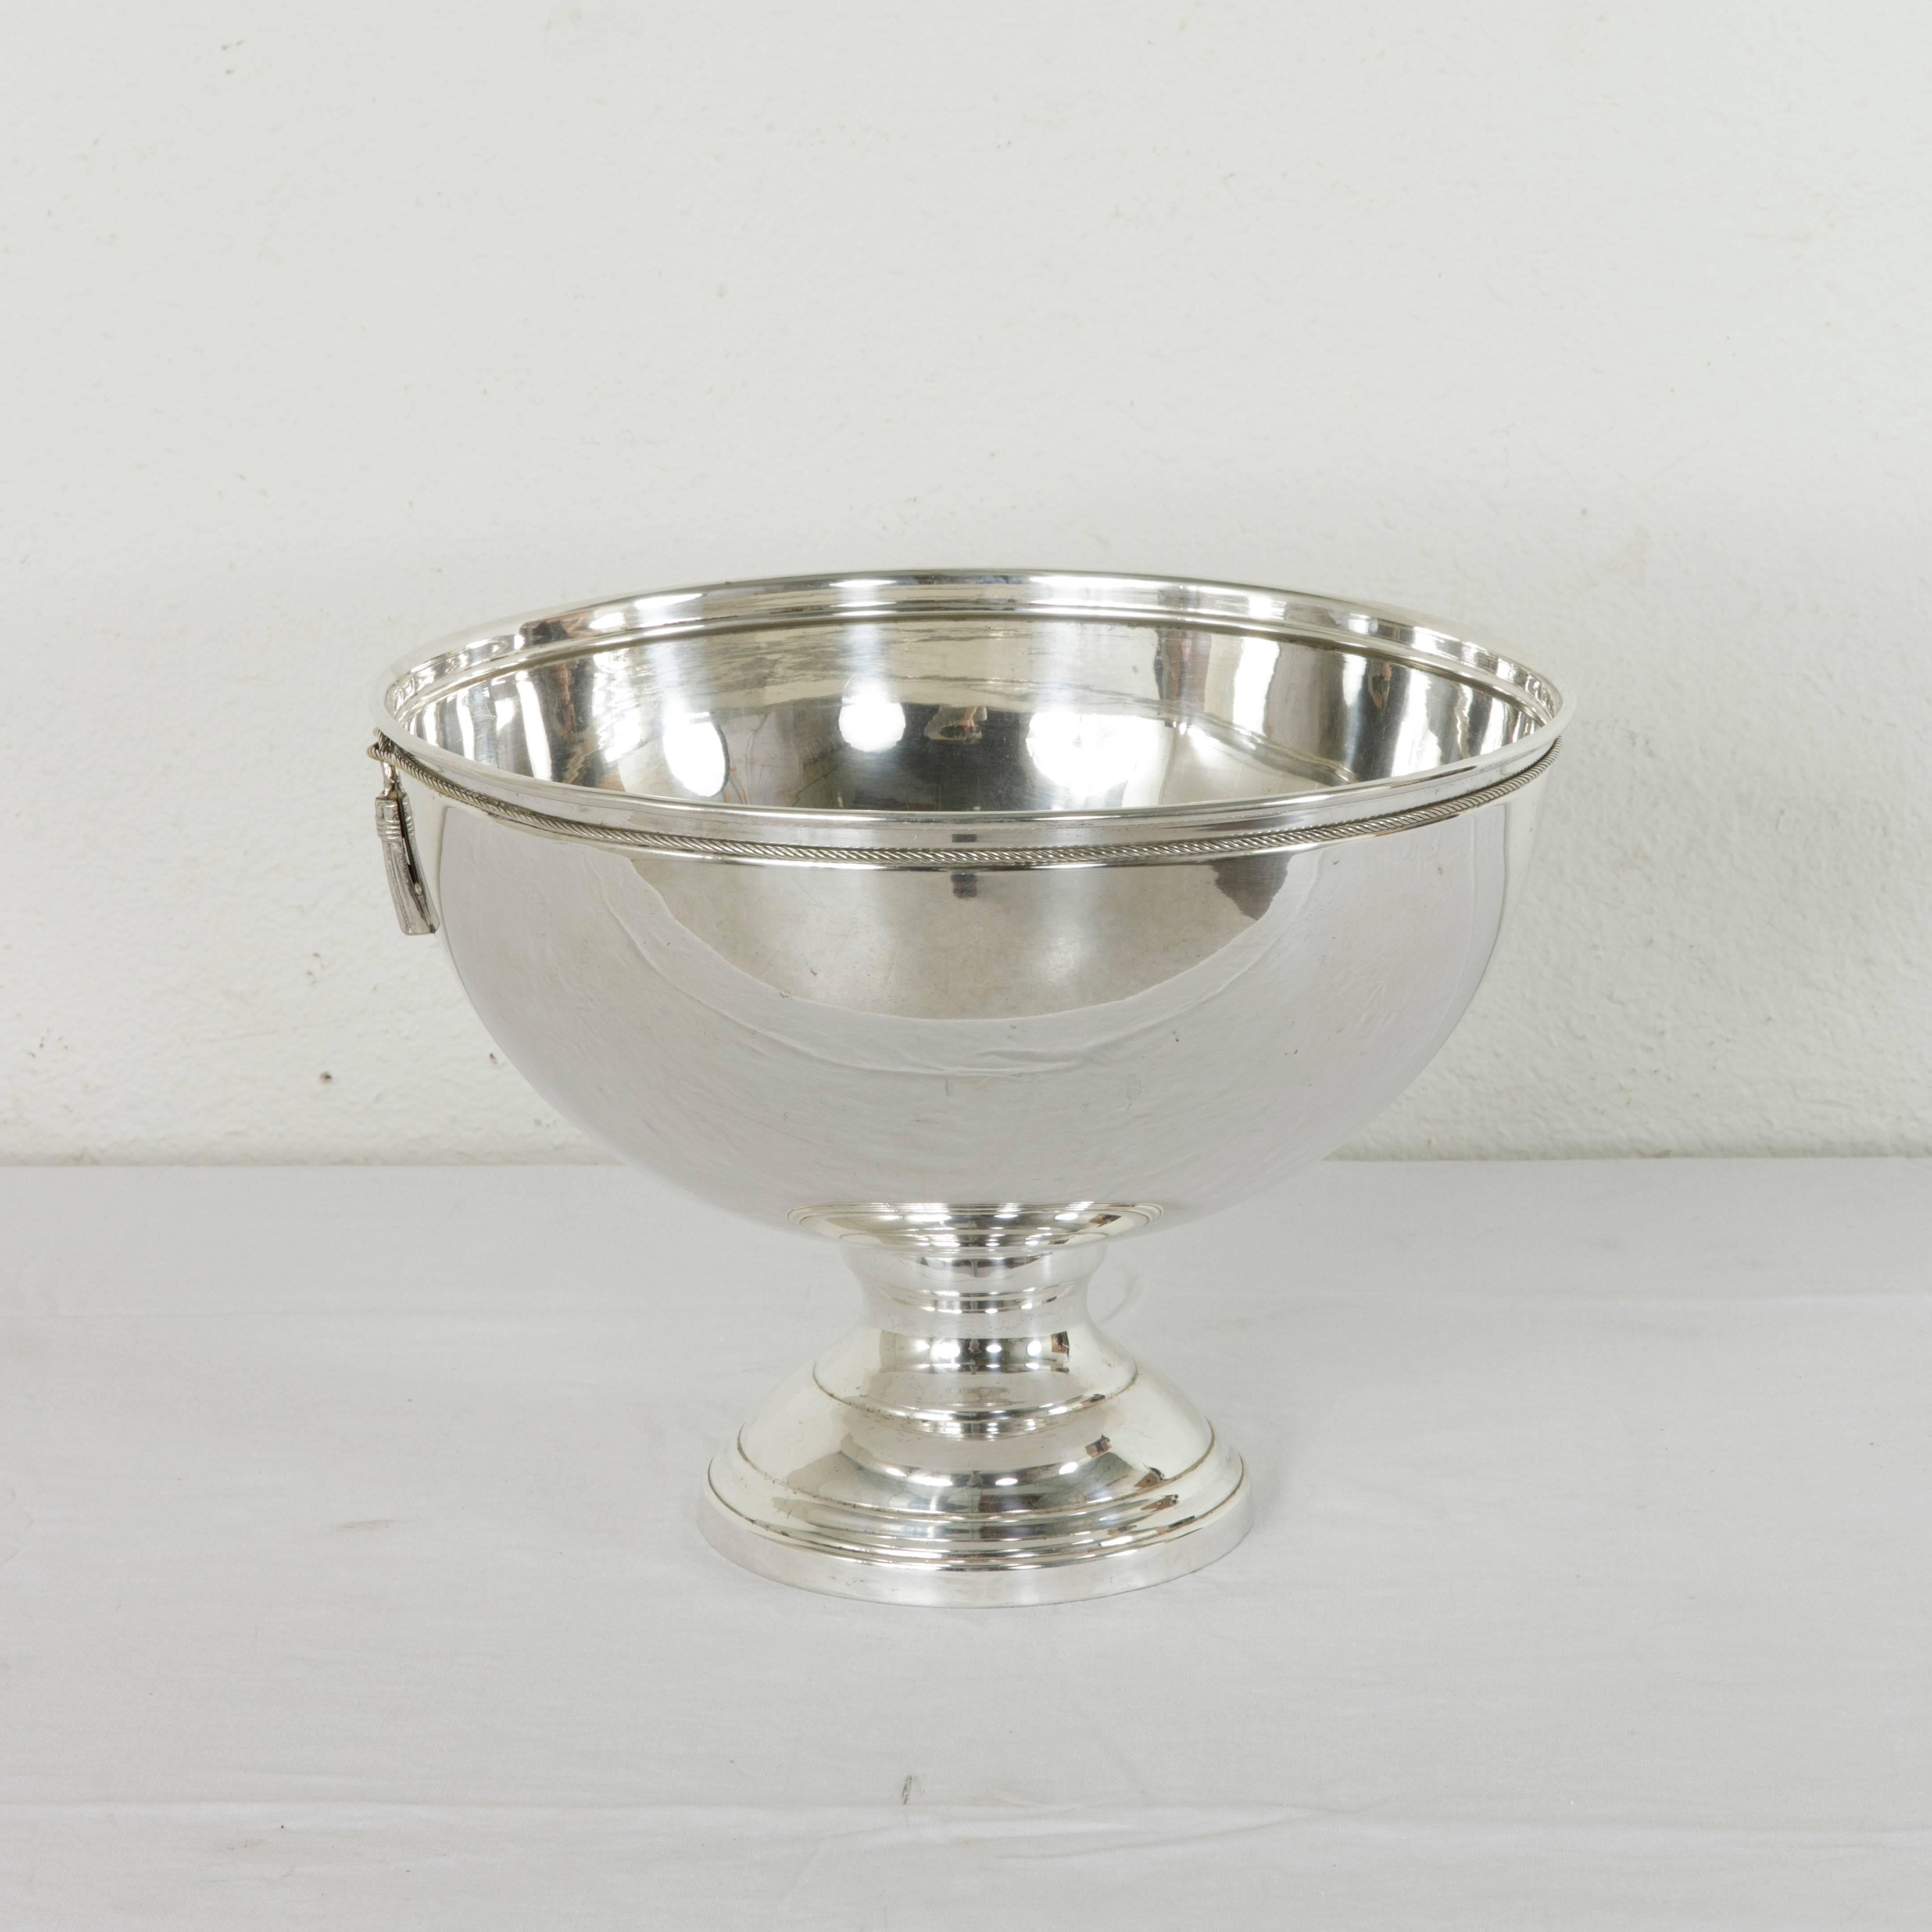 Mid-20th Century French Silver Plate Hotel Champagne Bucket for Four Bottles 1